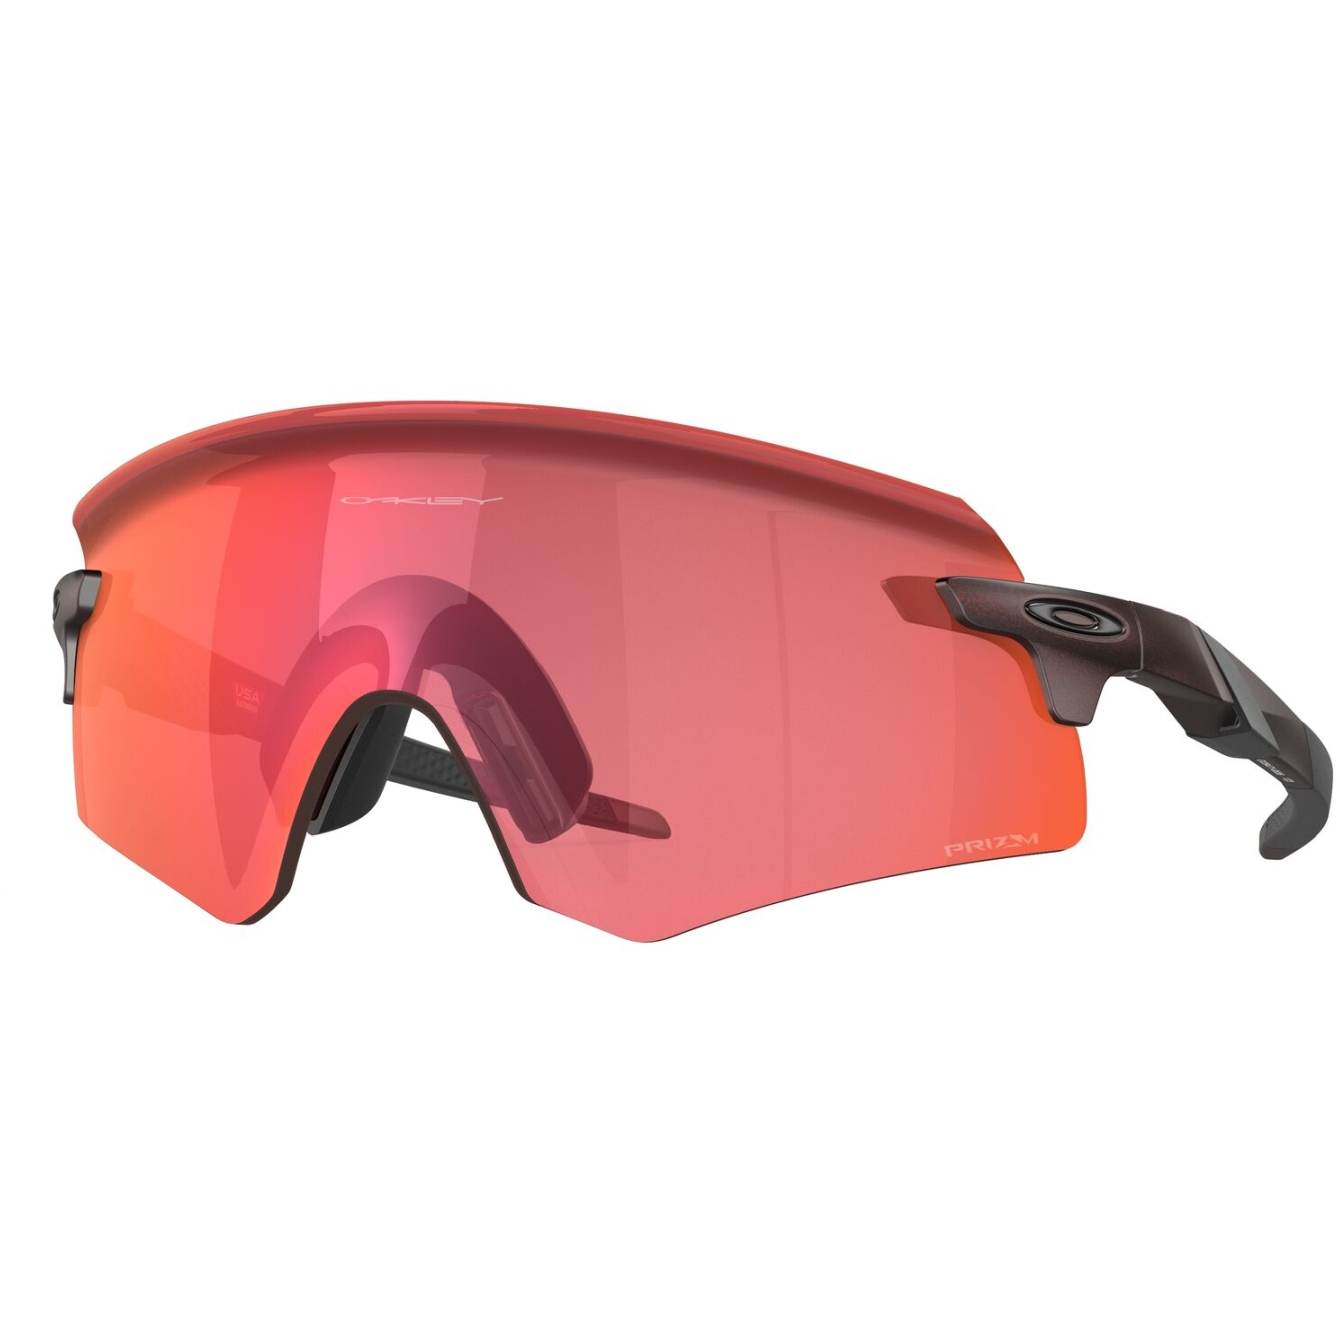 Picture of Oakley Encoder Glasses - Matte Red Colorshift/Prizm Trail Torch - OO9471-0836